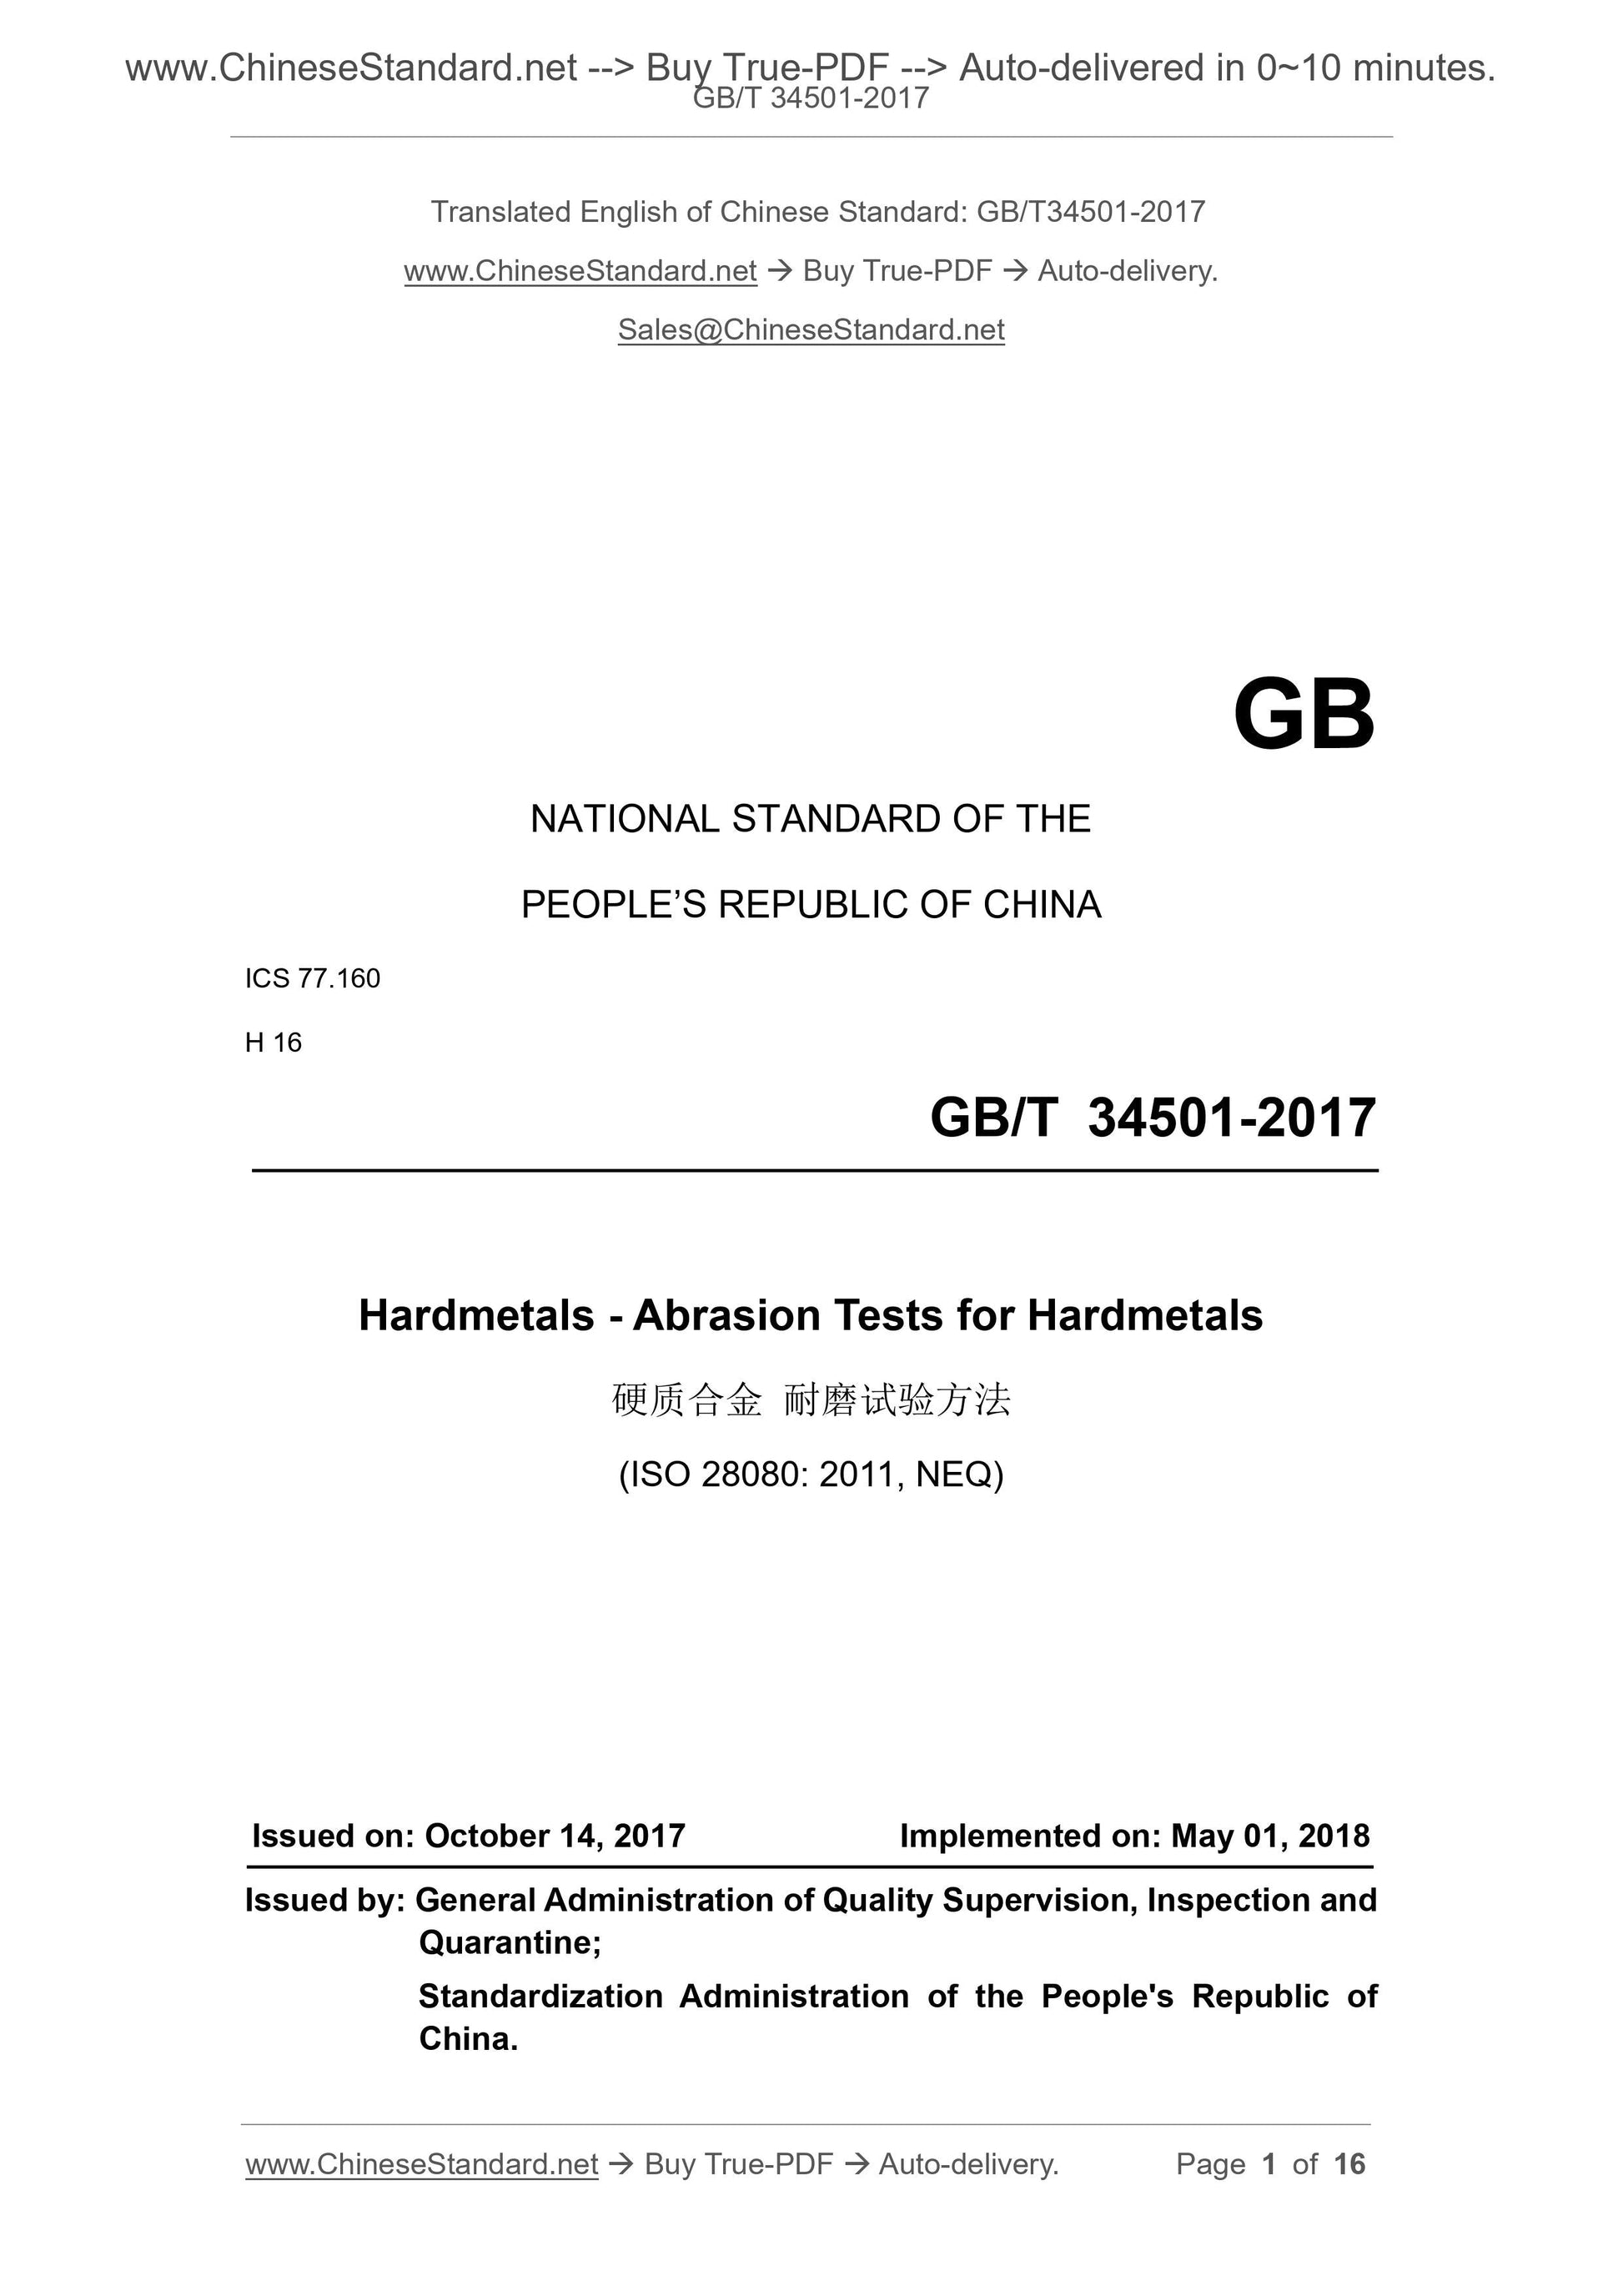 GB/T 34501-2017 Page 1